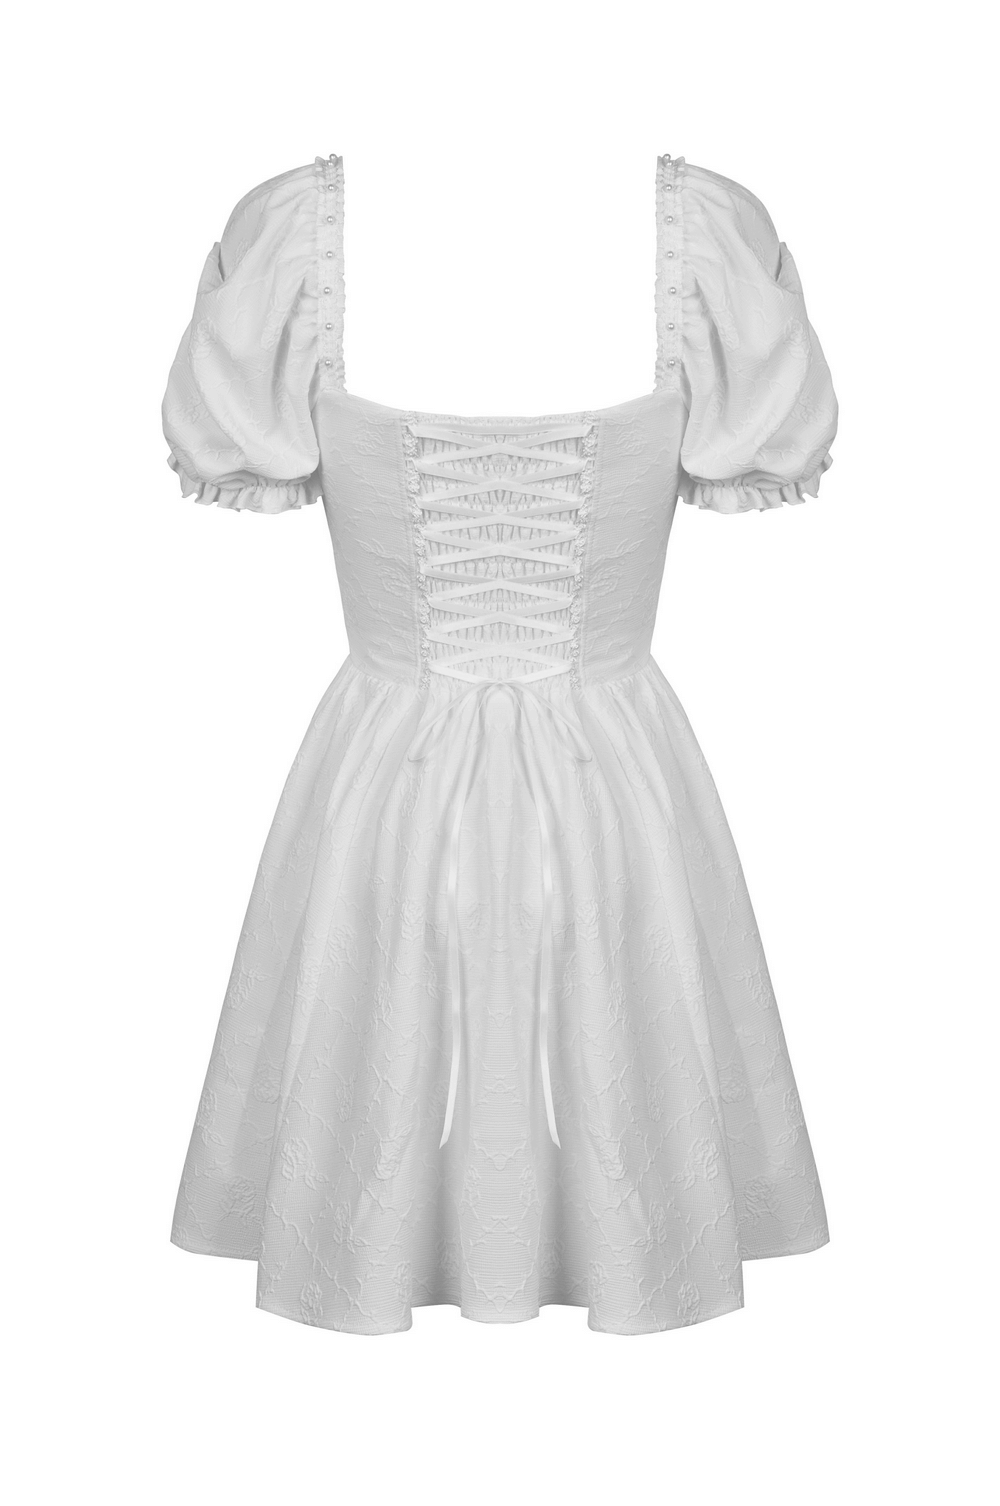 Elegant White Dress with Lace Detail and Puff Sleeves